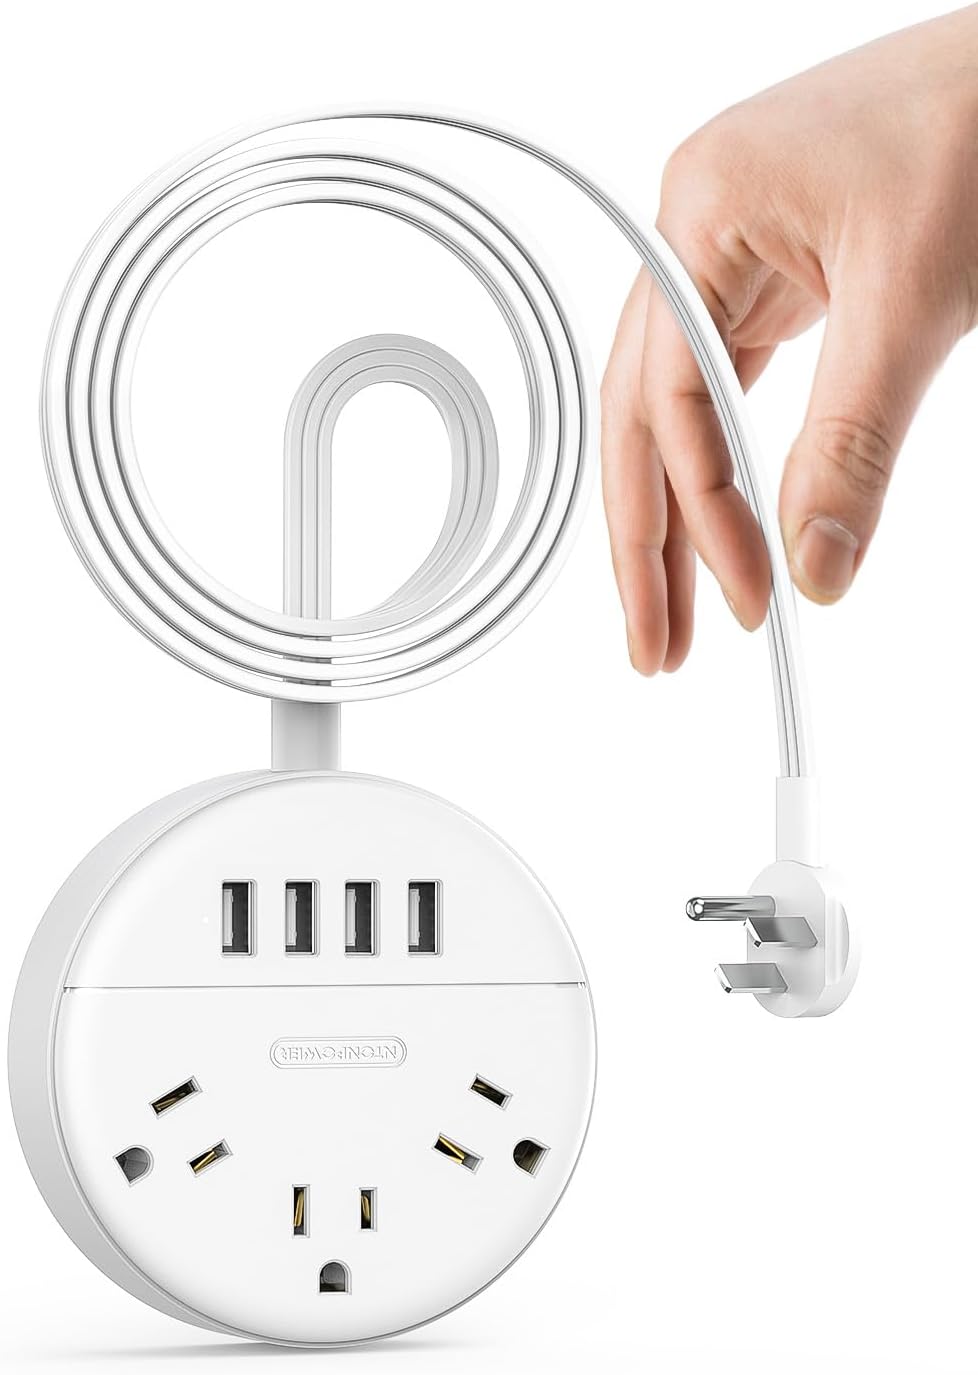 Ntonpower Ultra Thin Flat Plug Dot Power Strip with 3 Outlets 4 USB Ports